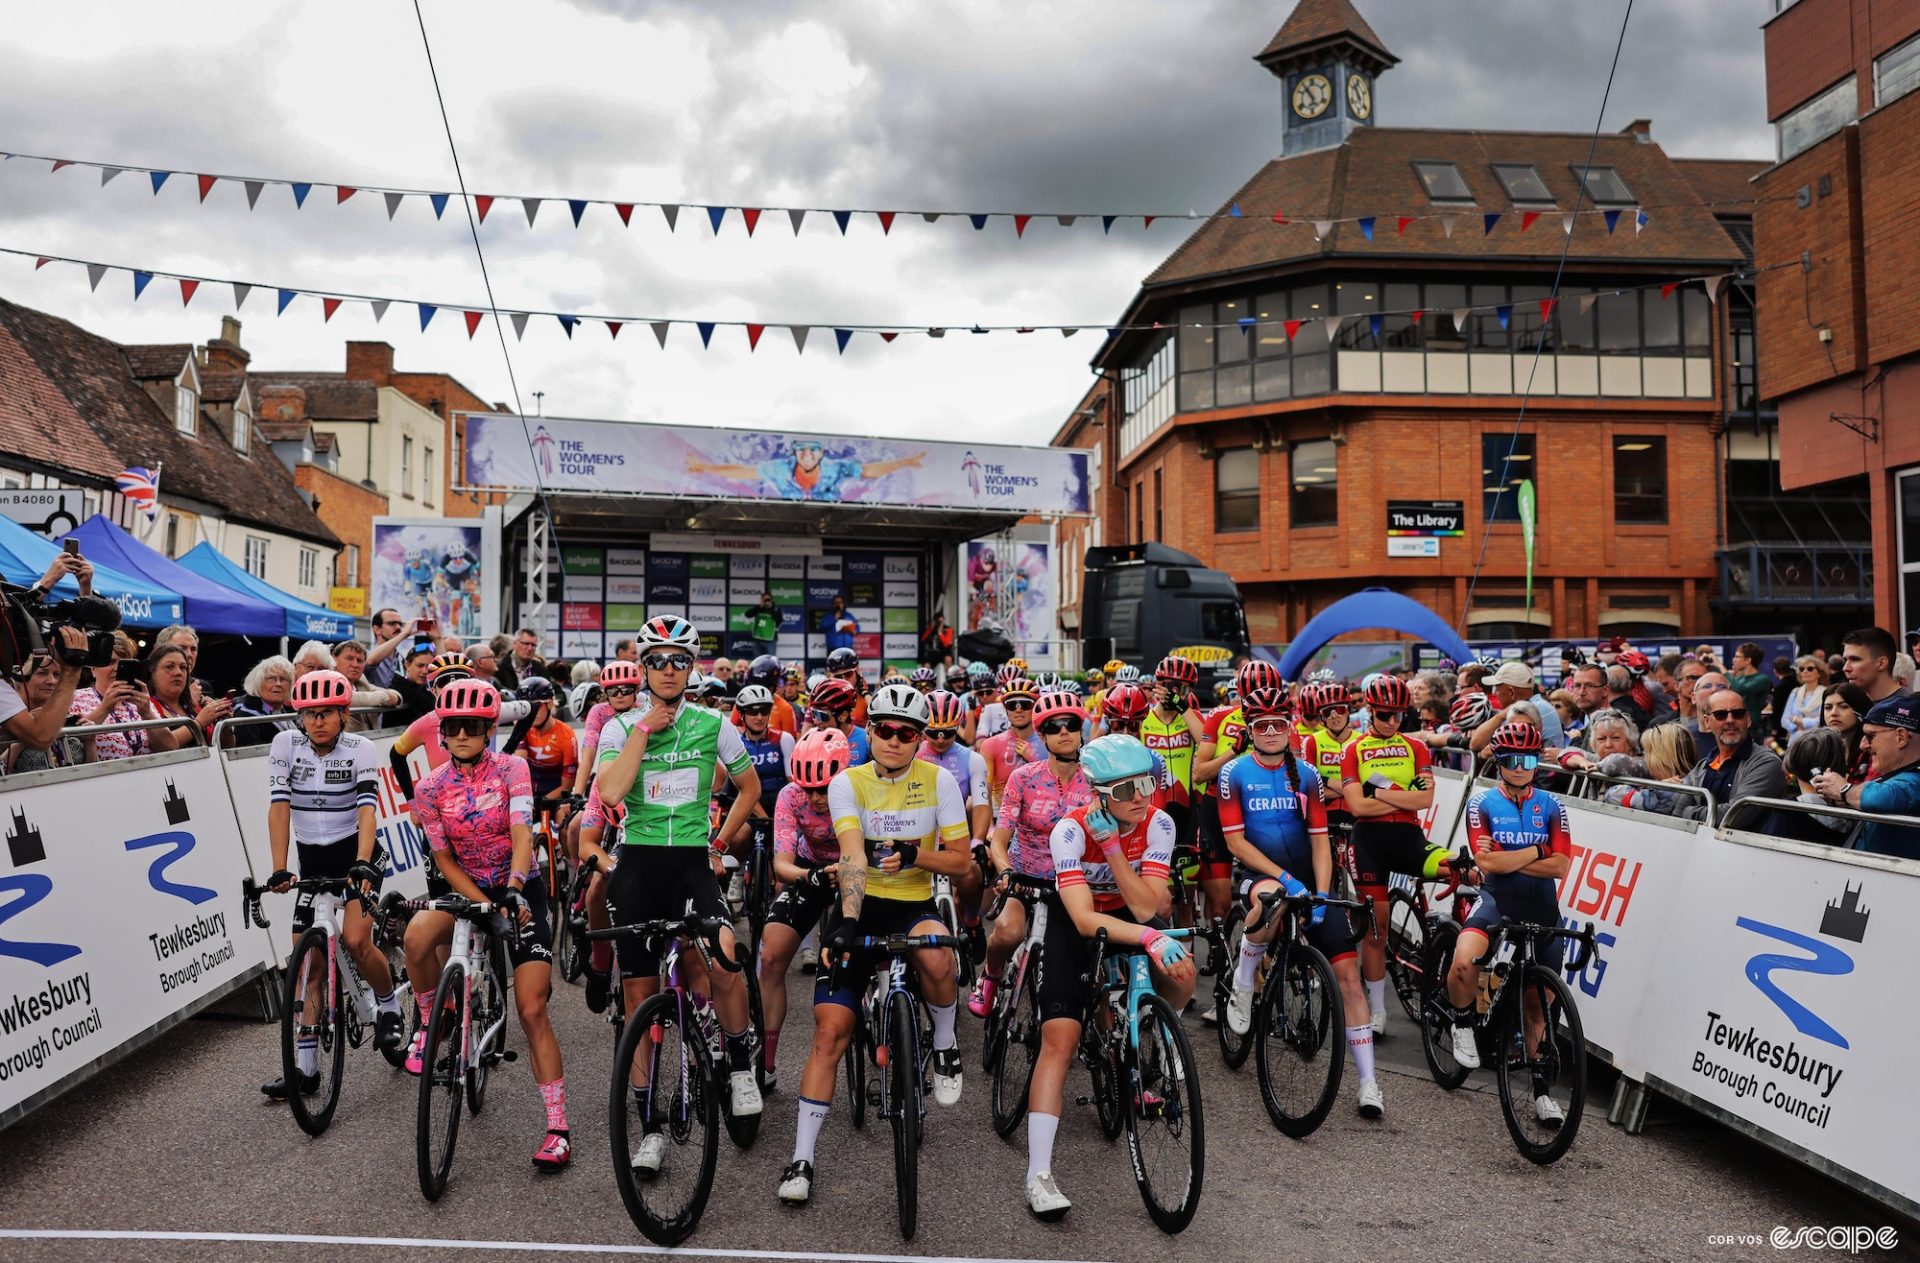 The peloton awaits the departure of stage 3 of The Women's Tour in Tewkesbury. The pack is standing on their bikes ready to go, with fans clustered at the barriers. The now-empty sign-in stage rises behind them.